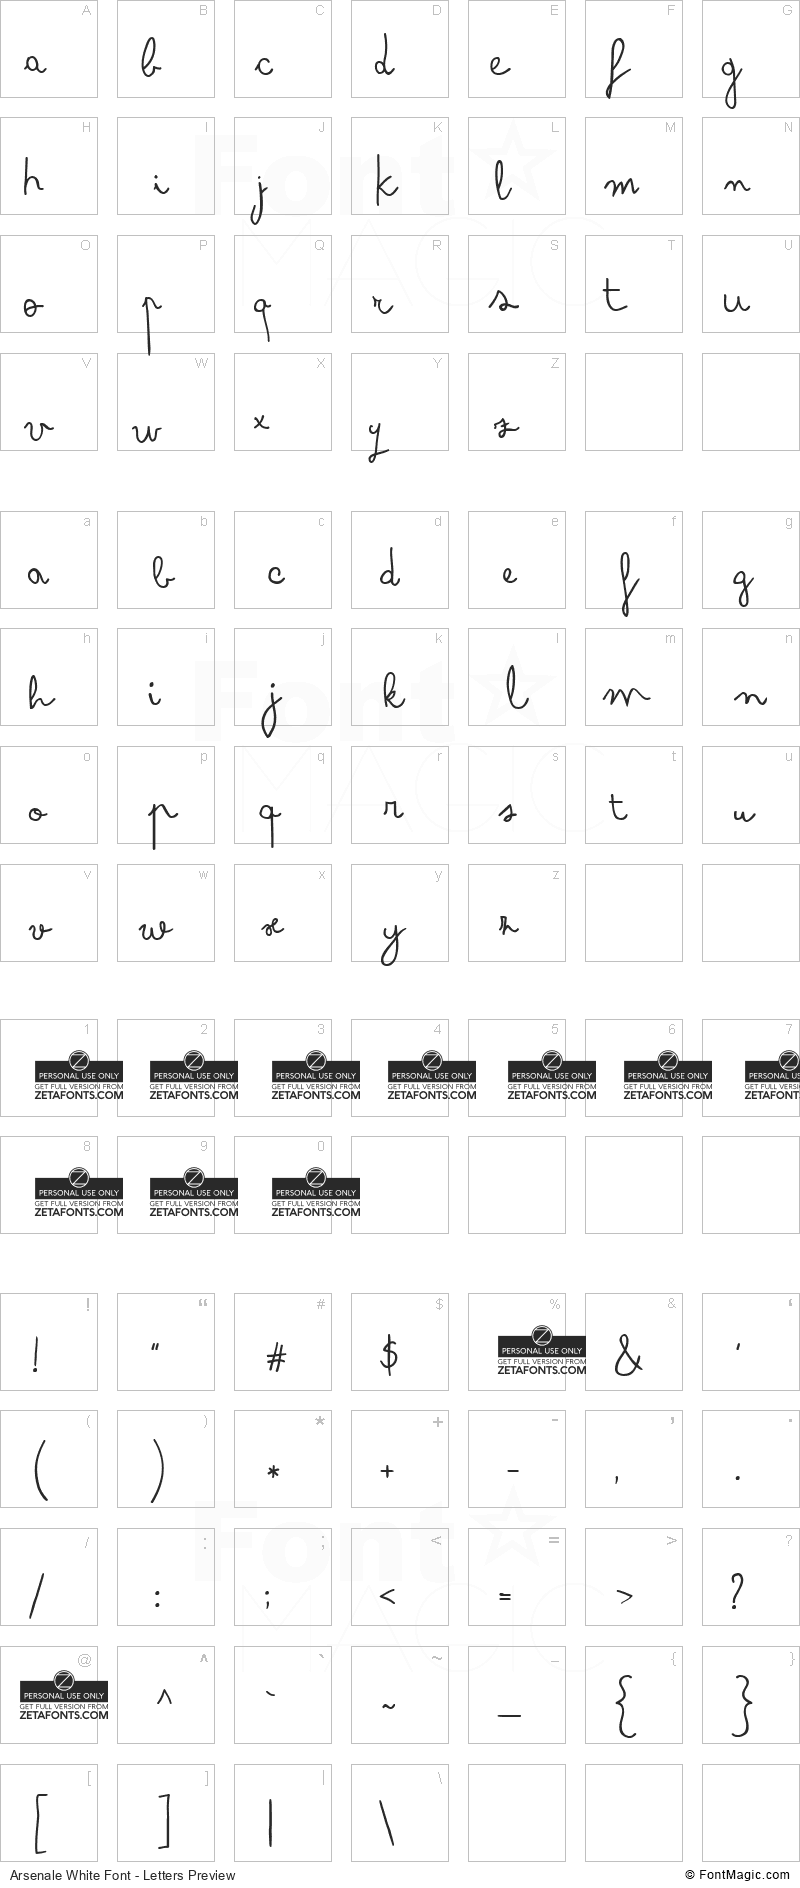 Arsenale White Font - All Latters Preview Chart